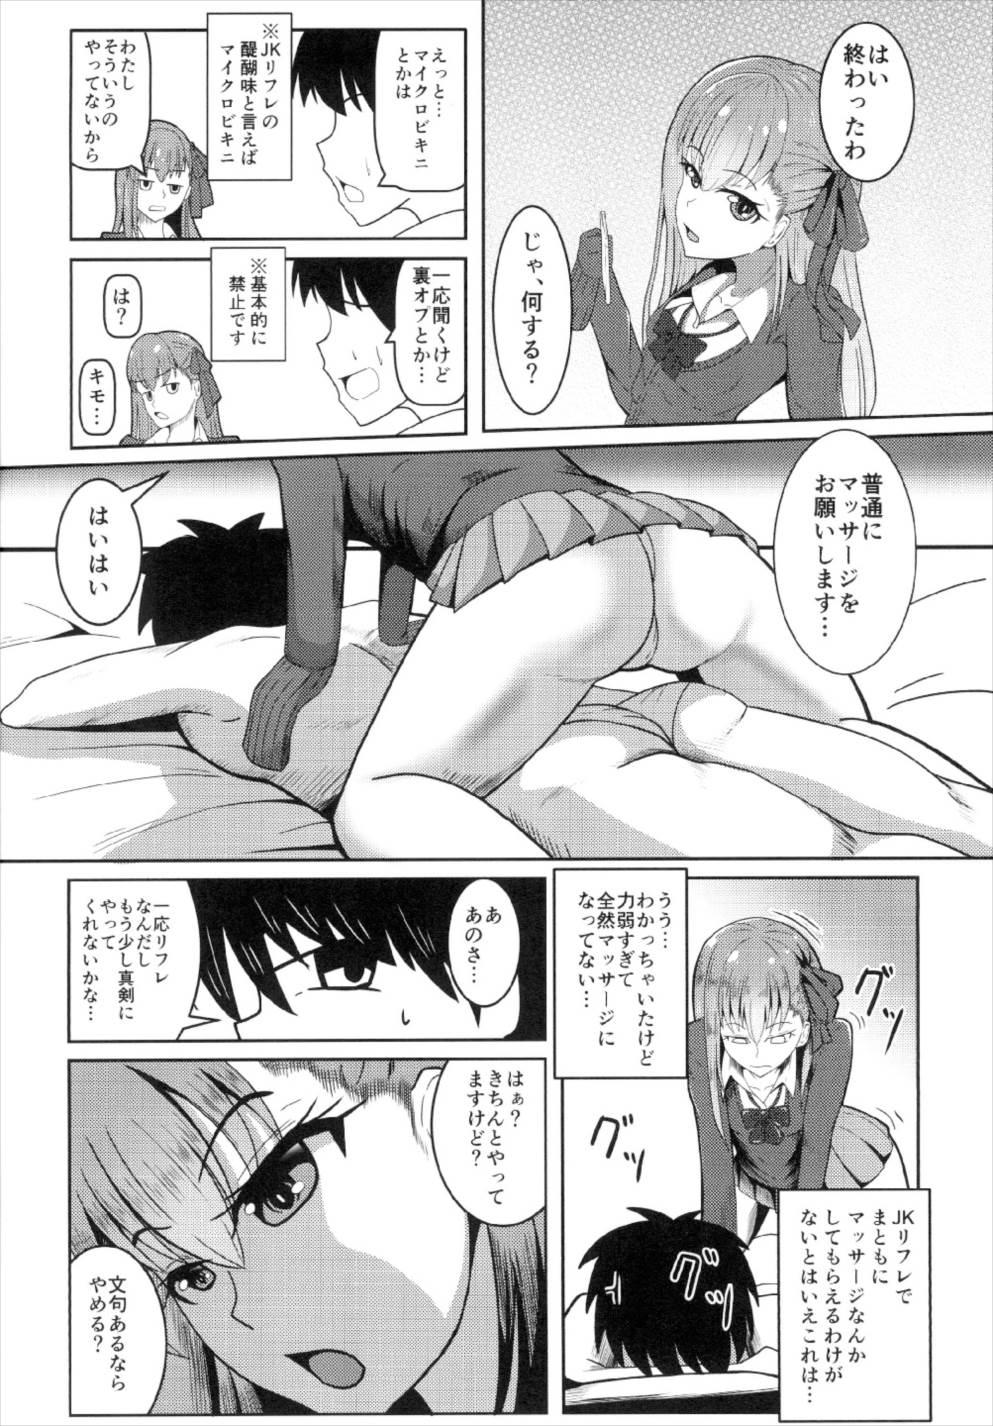 Submissive Chaldea JK Collection Vol. 2 Meltlilith - Fate grand order Pussy Orgasm - Page 4